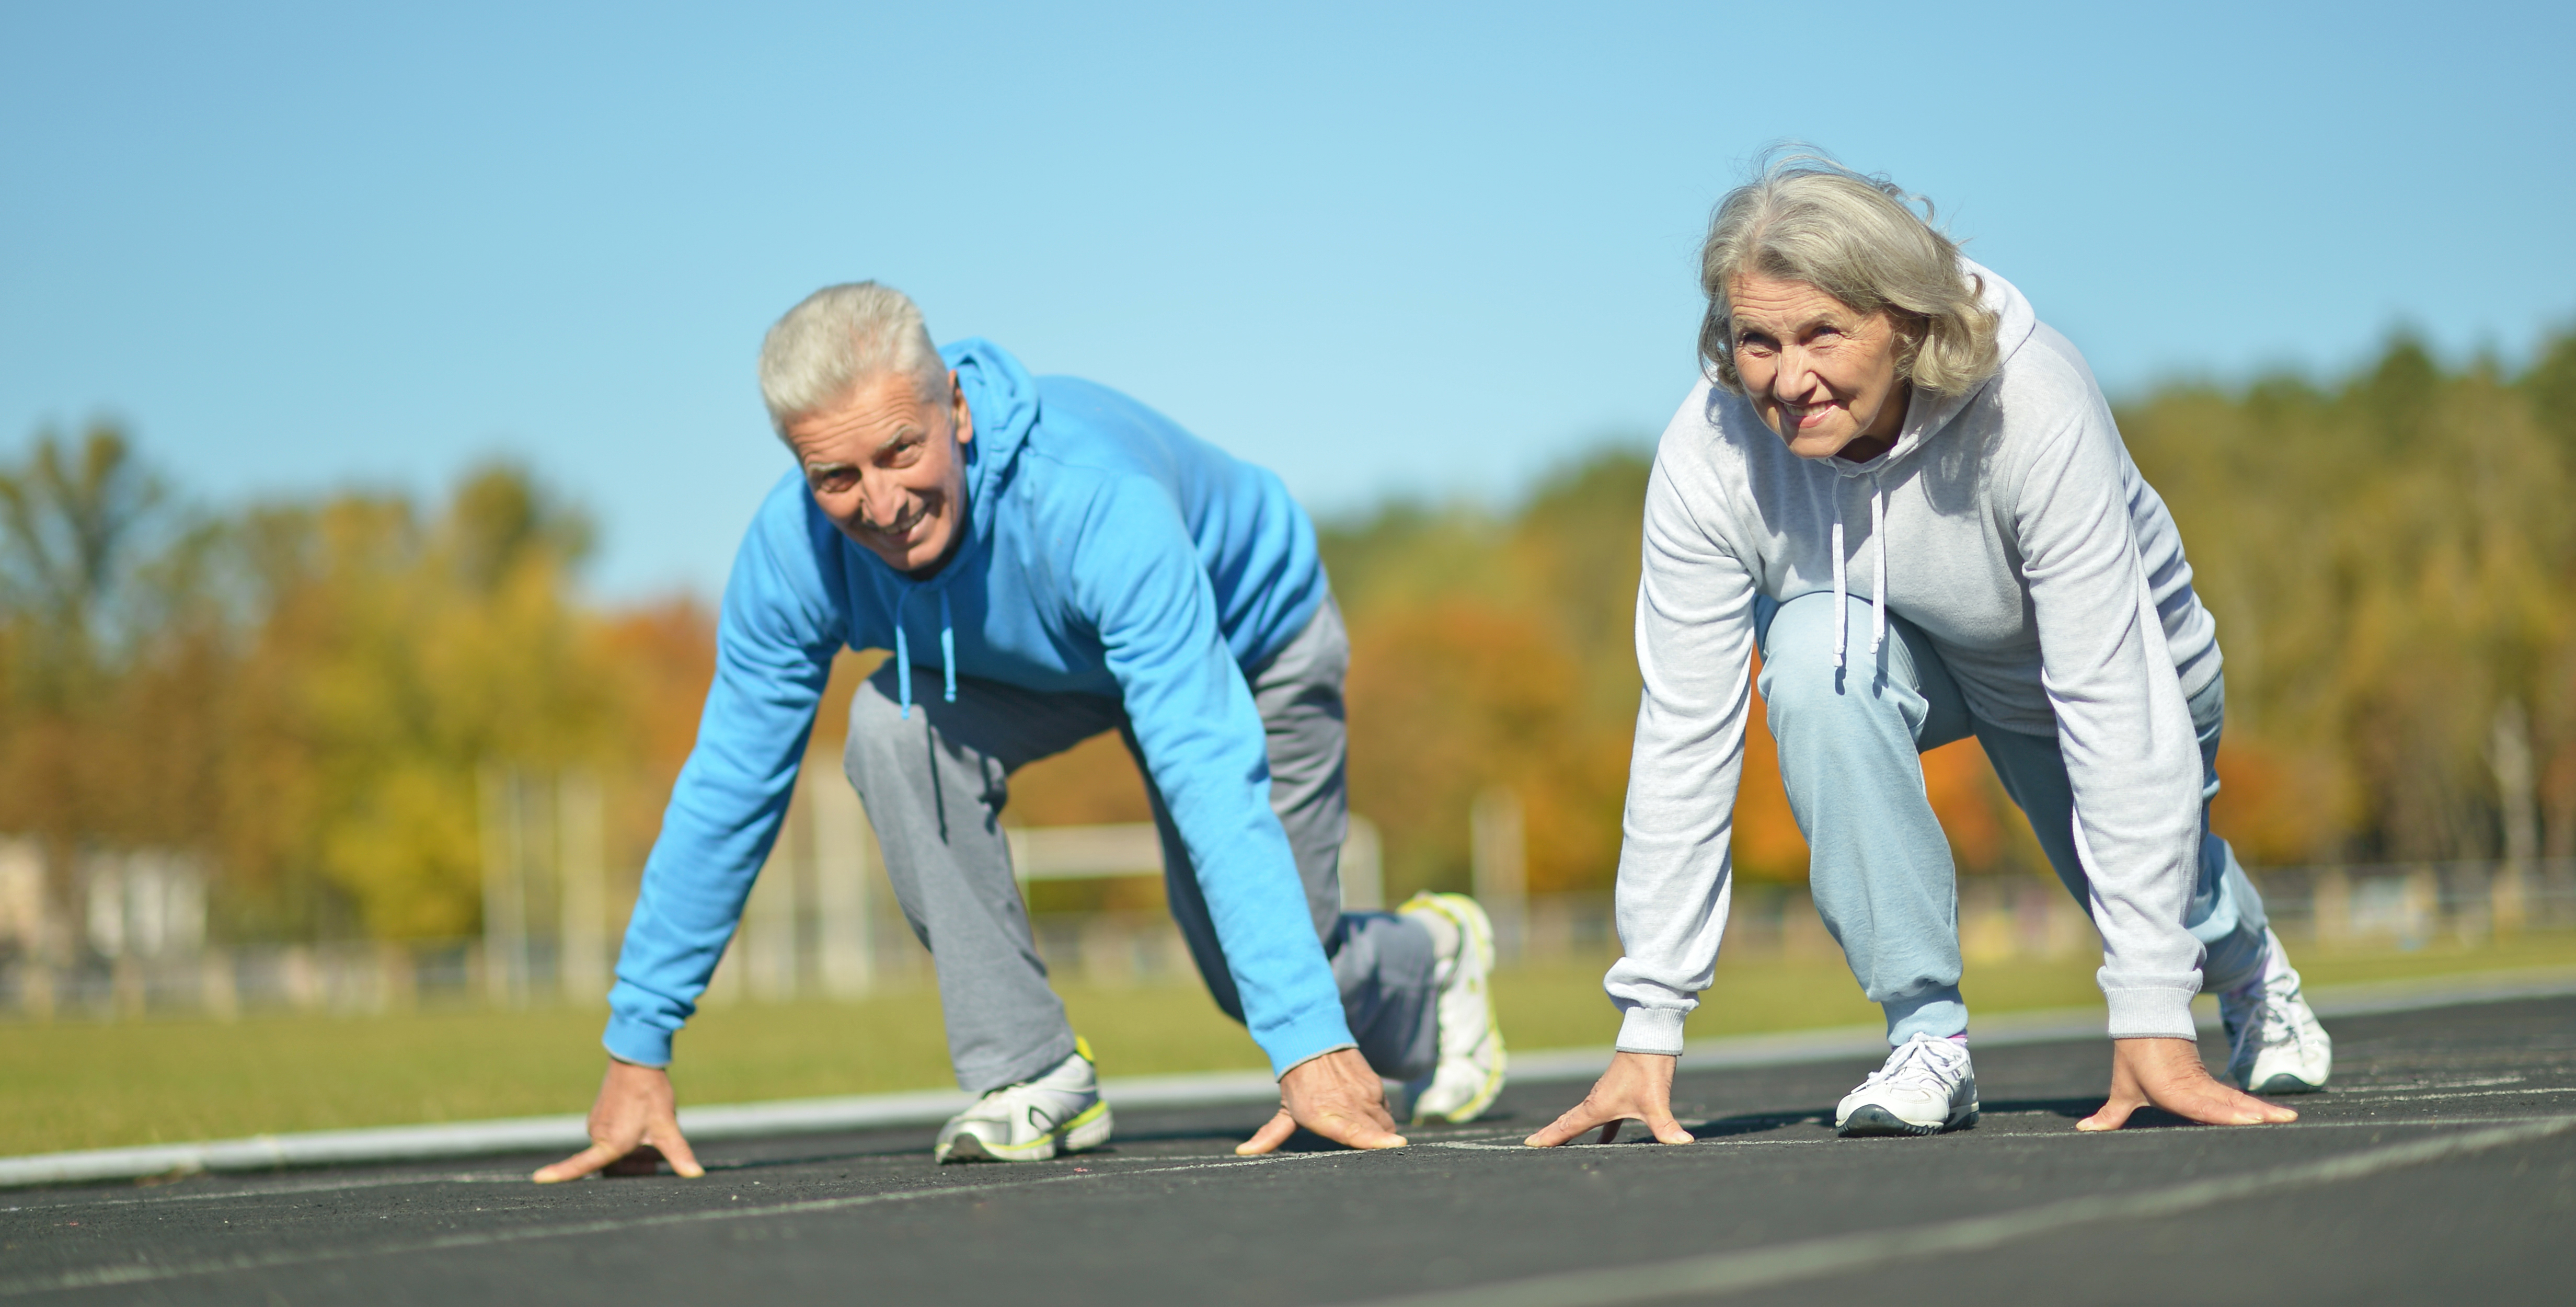 Preventing Osteoporosis: Questions for the doctor 